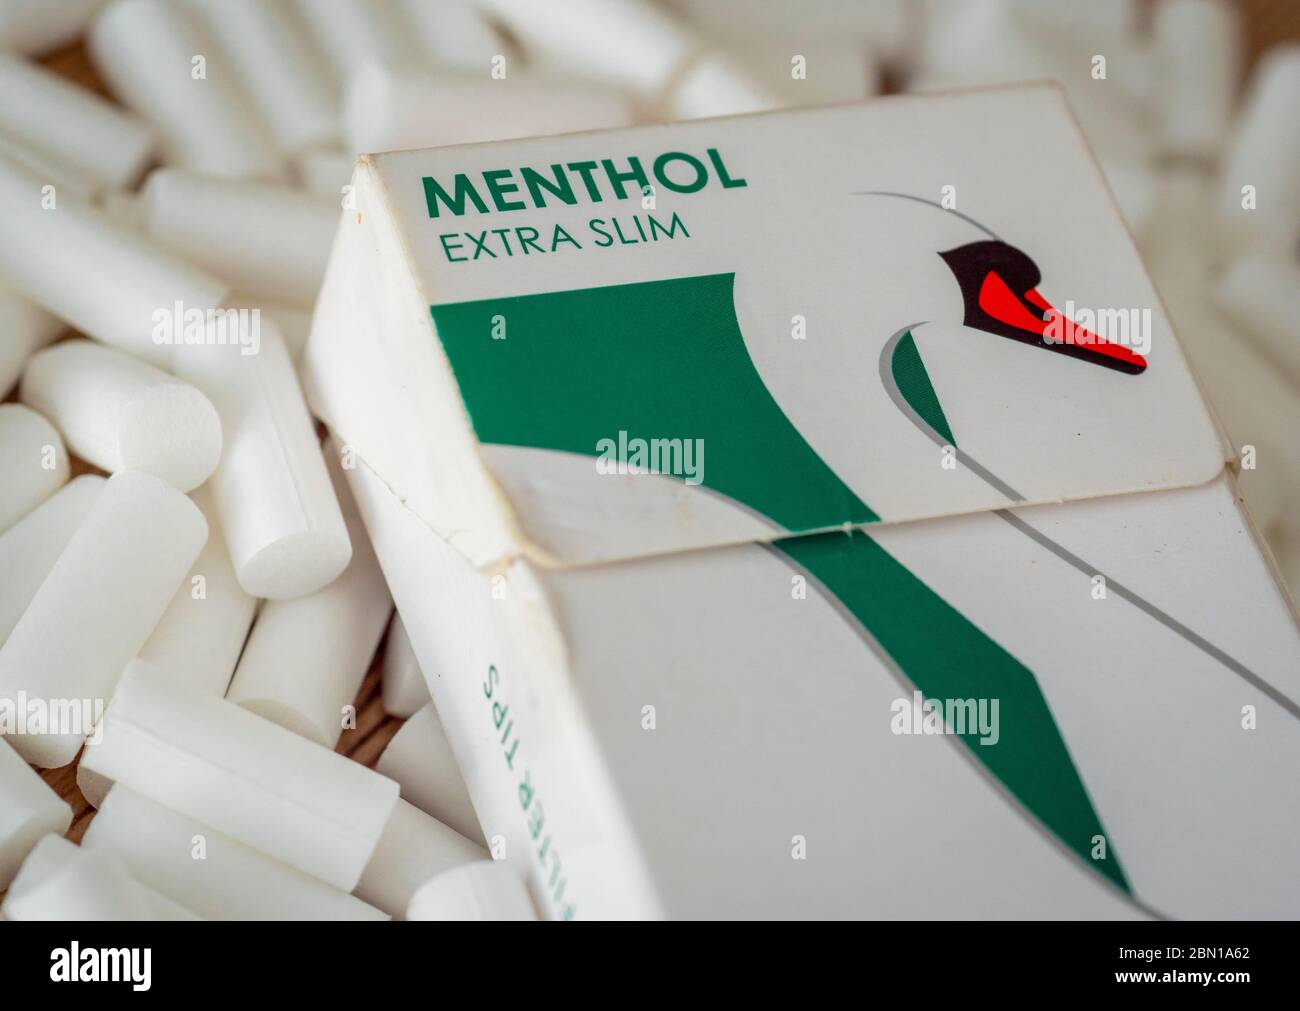 https://c8.alamy.com/comp/2BN1A62/box-of-swan-menthol-filter-tips-for-hand-rolled-cigarettes-a-ban-on-menthol-cigarettes-comes-into-force-in-may-2020-2BN1A62.jpg